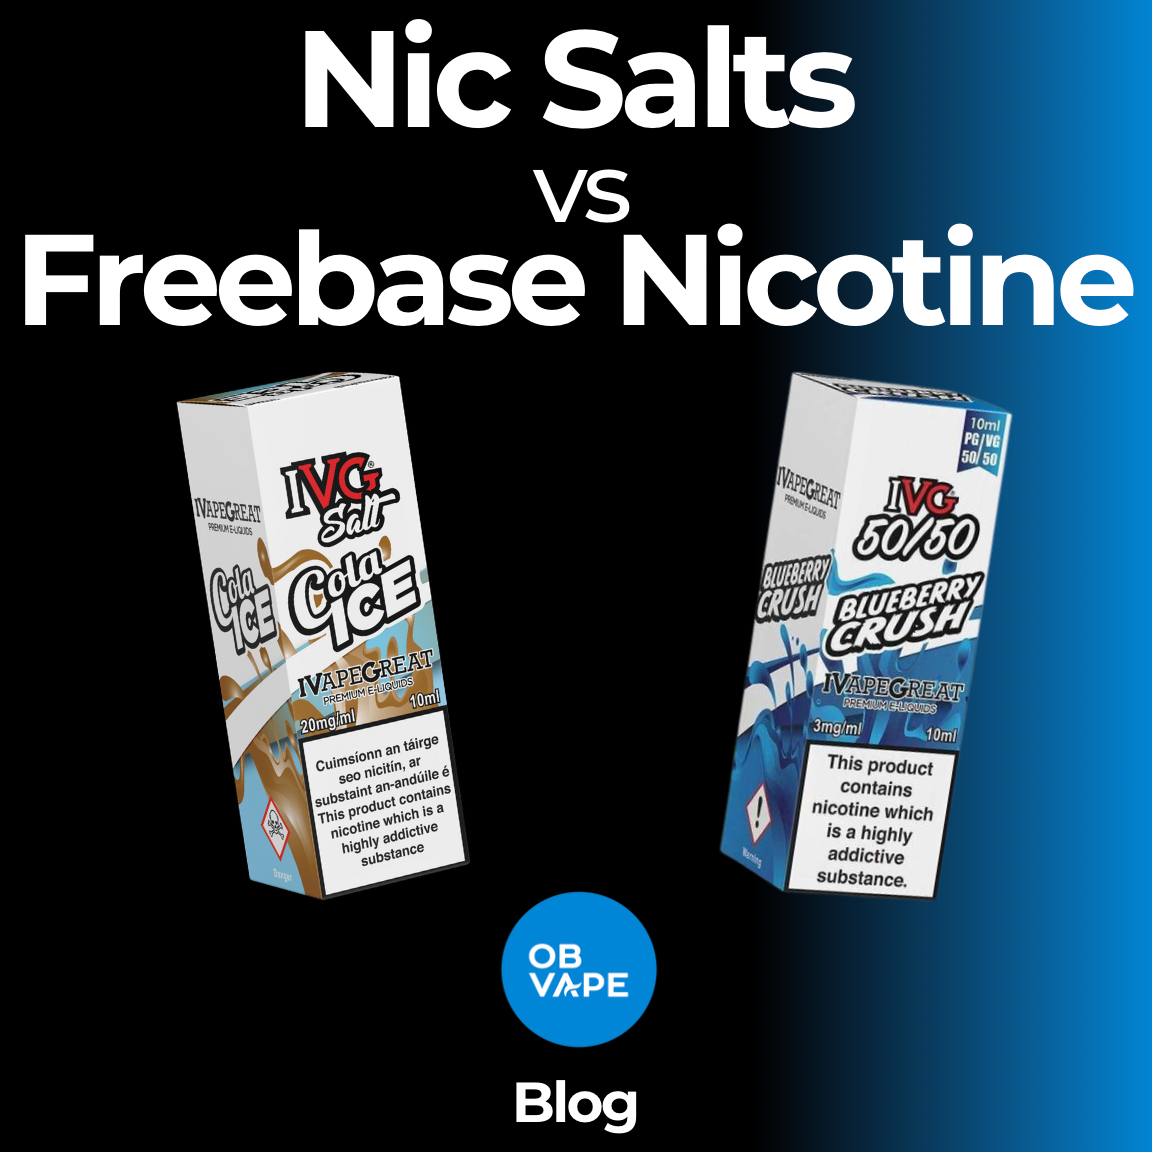 Nic Salts vs Freebase Nicotine - What Is The Difference?